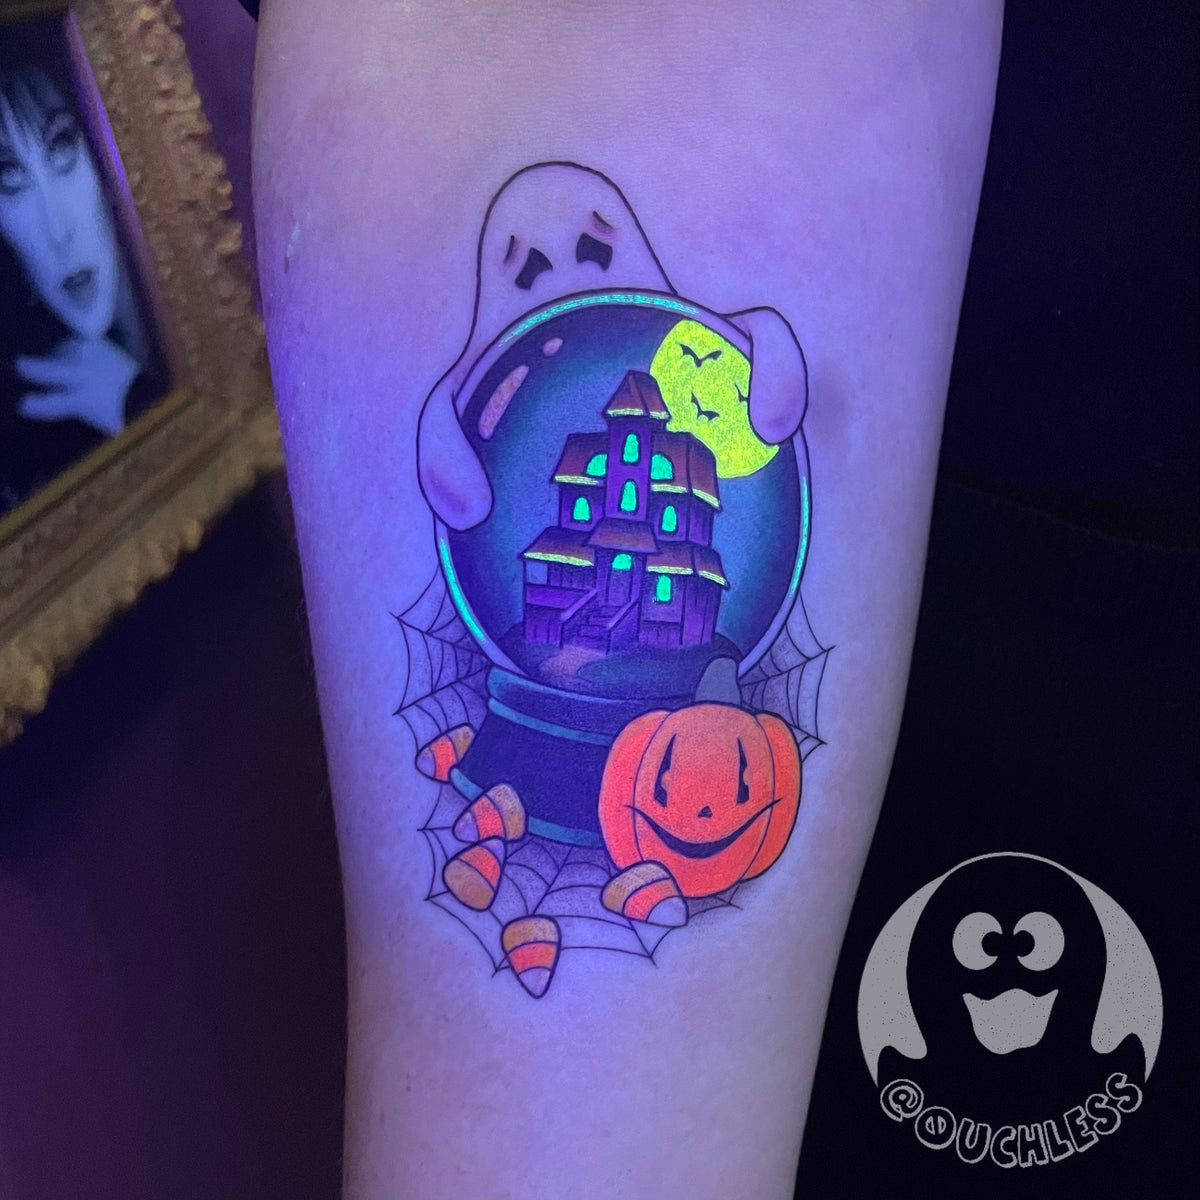 Check Out These Spook-tacular Glow in the Dark Tattoos This Halloween